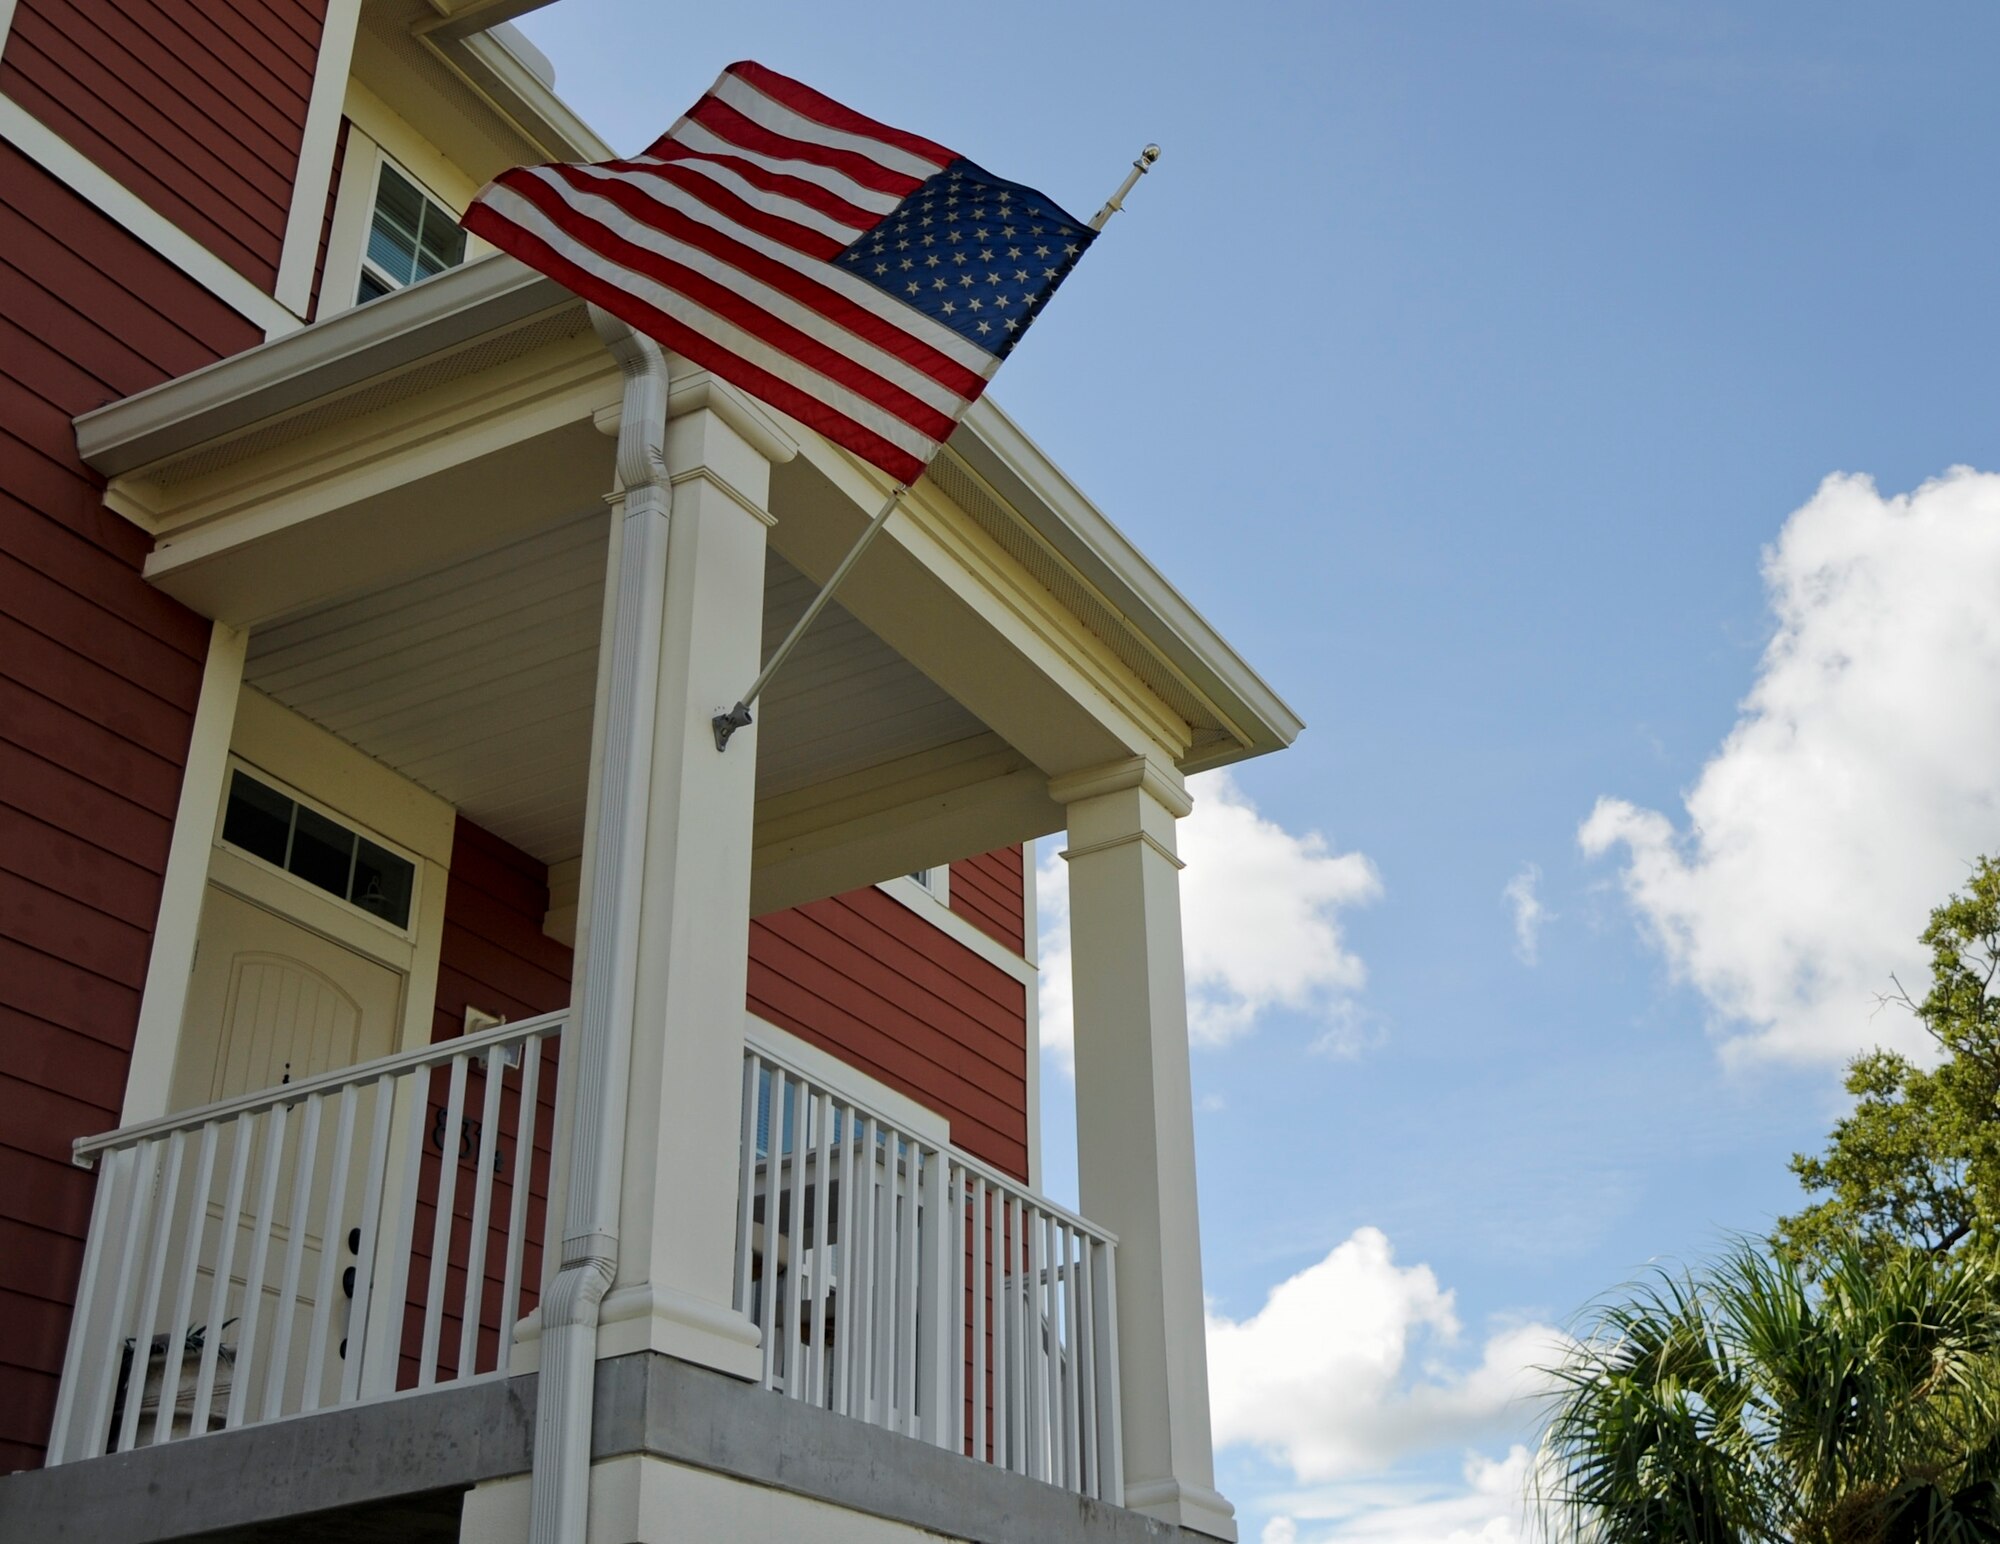 A U.S. flag flies on a MacDill Air Force Base, Florida, housing unit in 2015. The Department of the Air Force is asking tenants of privatized housing to share their experiences and opinions of the programs via the DoD Tenant Satisfaction Survey as of Oct. 28. The survey, administered by CEL & Associates, Inc., is currently available through an email link to all MacDill AFB residents between Oct. 28 and Dec. 13. The OMB Control Number is: 0704-0553. The Department of the Air Force is funding the survey, and CEL & Associates is an independent third-party provider. (U.S. Air Force photo)